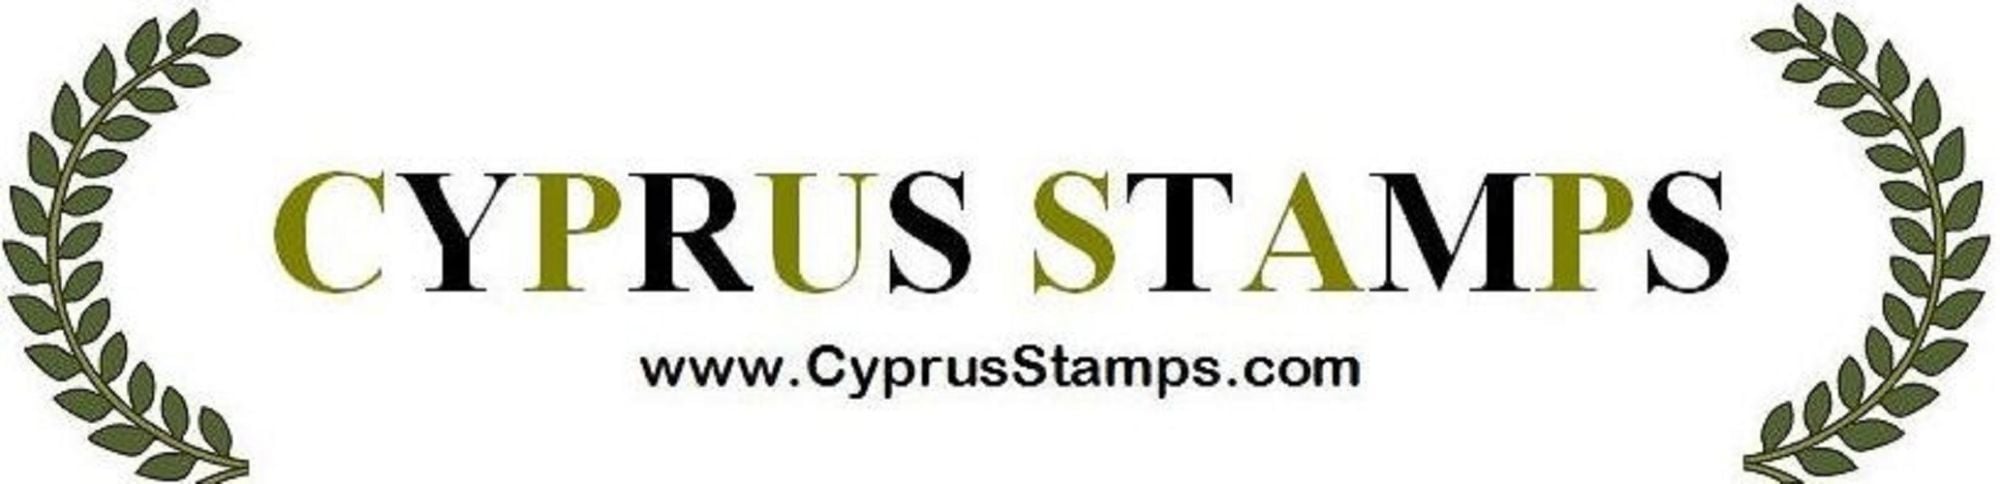 Cyprus Stamps, the only philatelic website in UK dedicated to postage stamps issued in Cyprus Republic and Turkish Cypriot (north Cyprus) stamps.